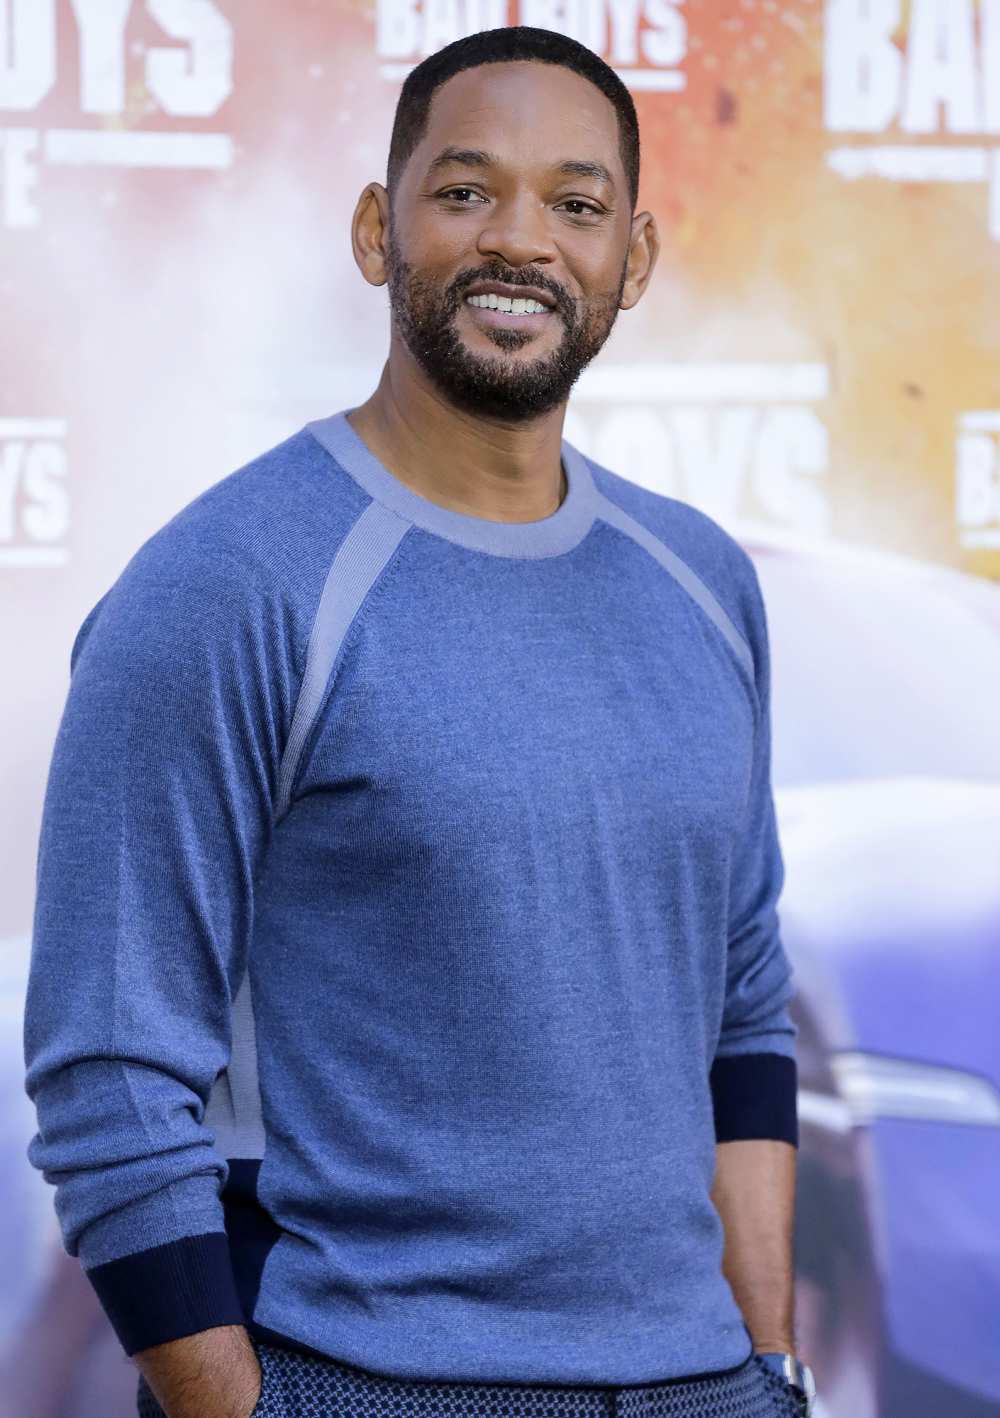 Will Smith Will ‘Consider’ A Run for Office Someday